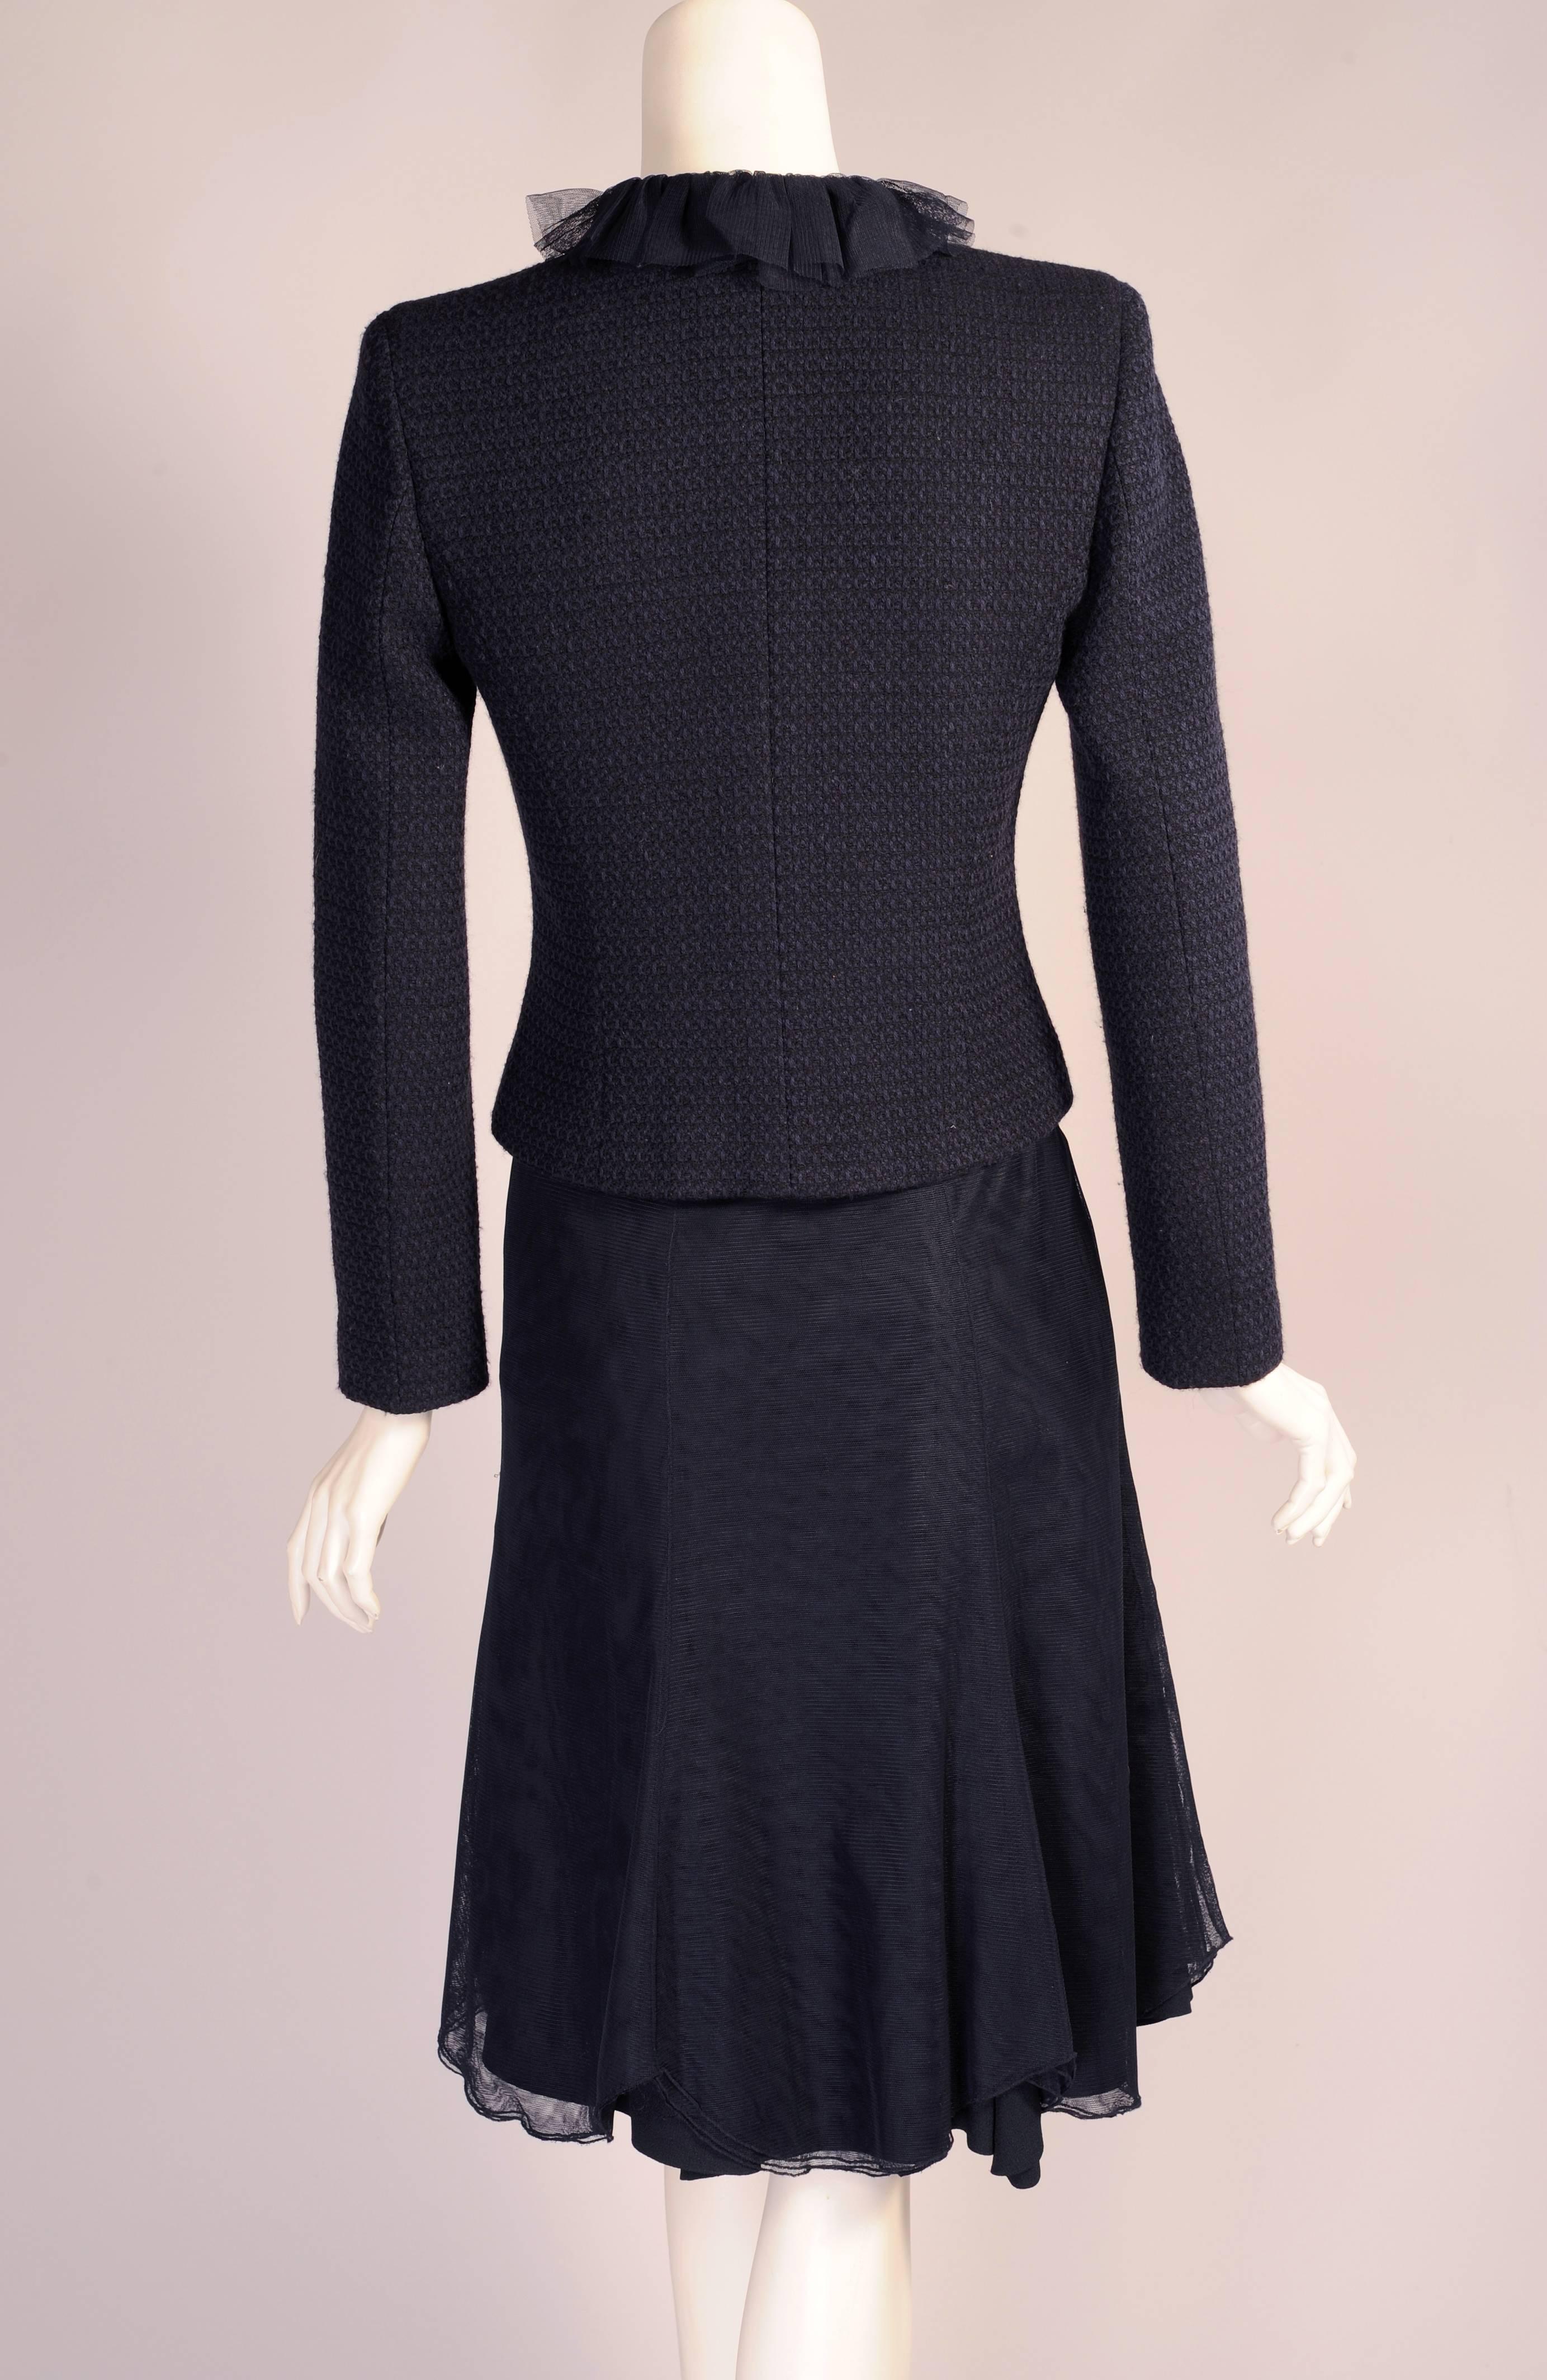 Women's Chanel Midnight Blue Tweed and Tulle Jacket and Tulle Skirt Suit 